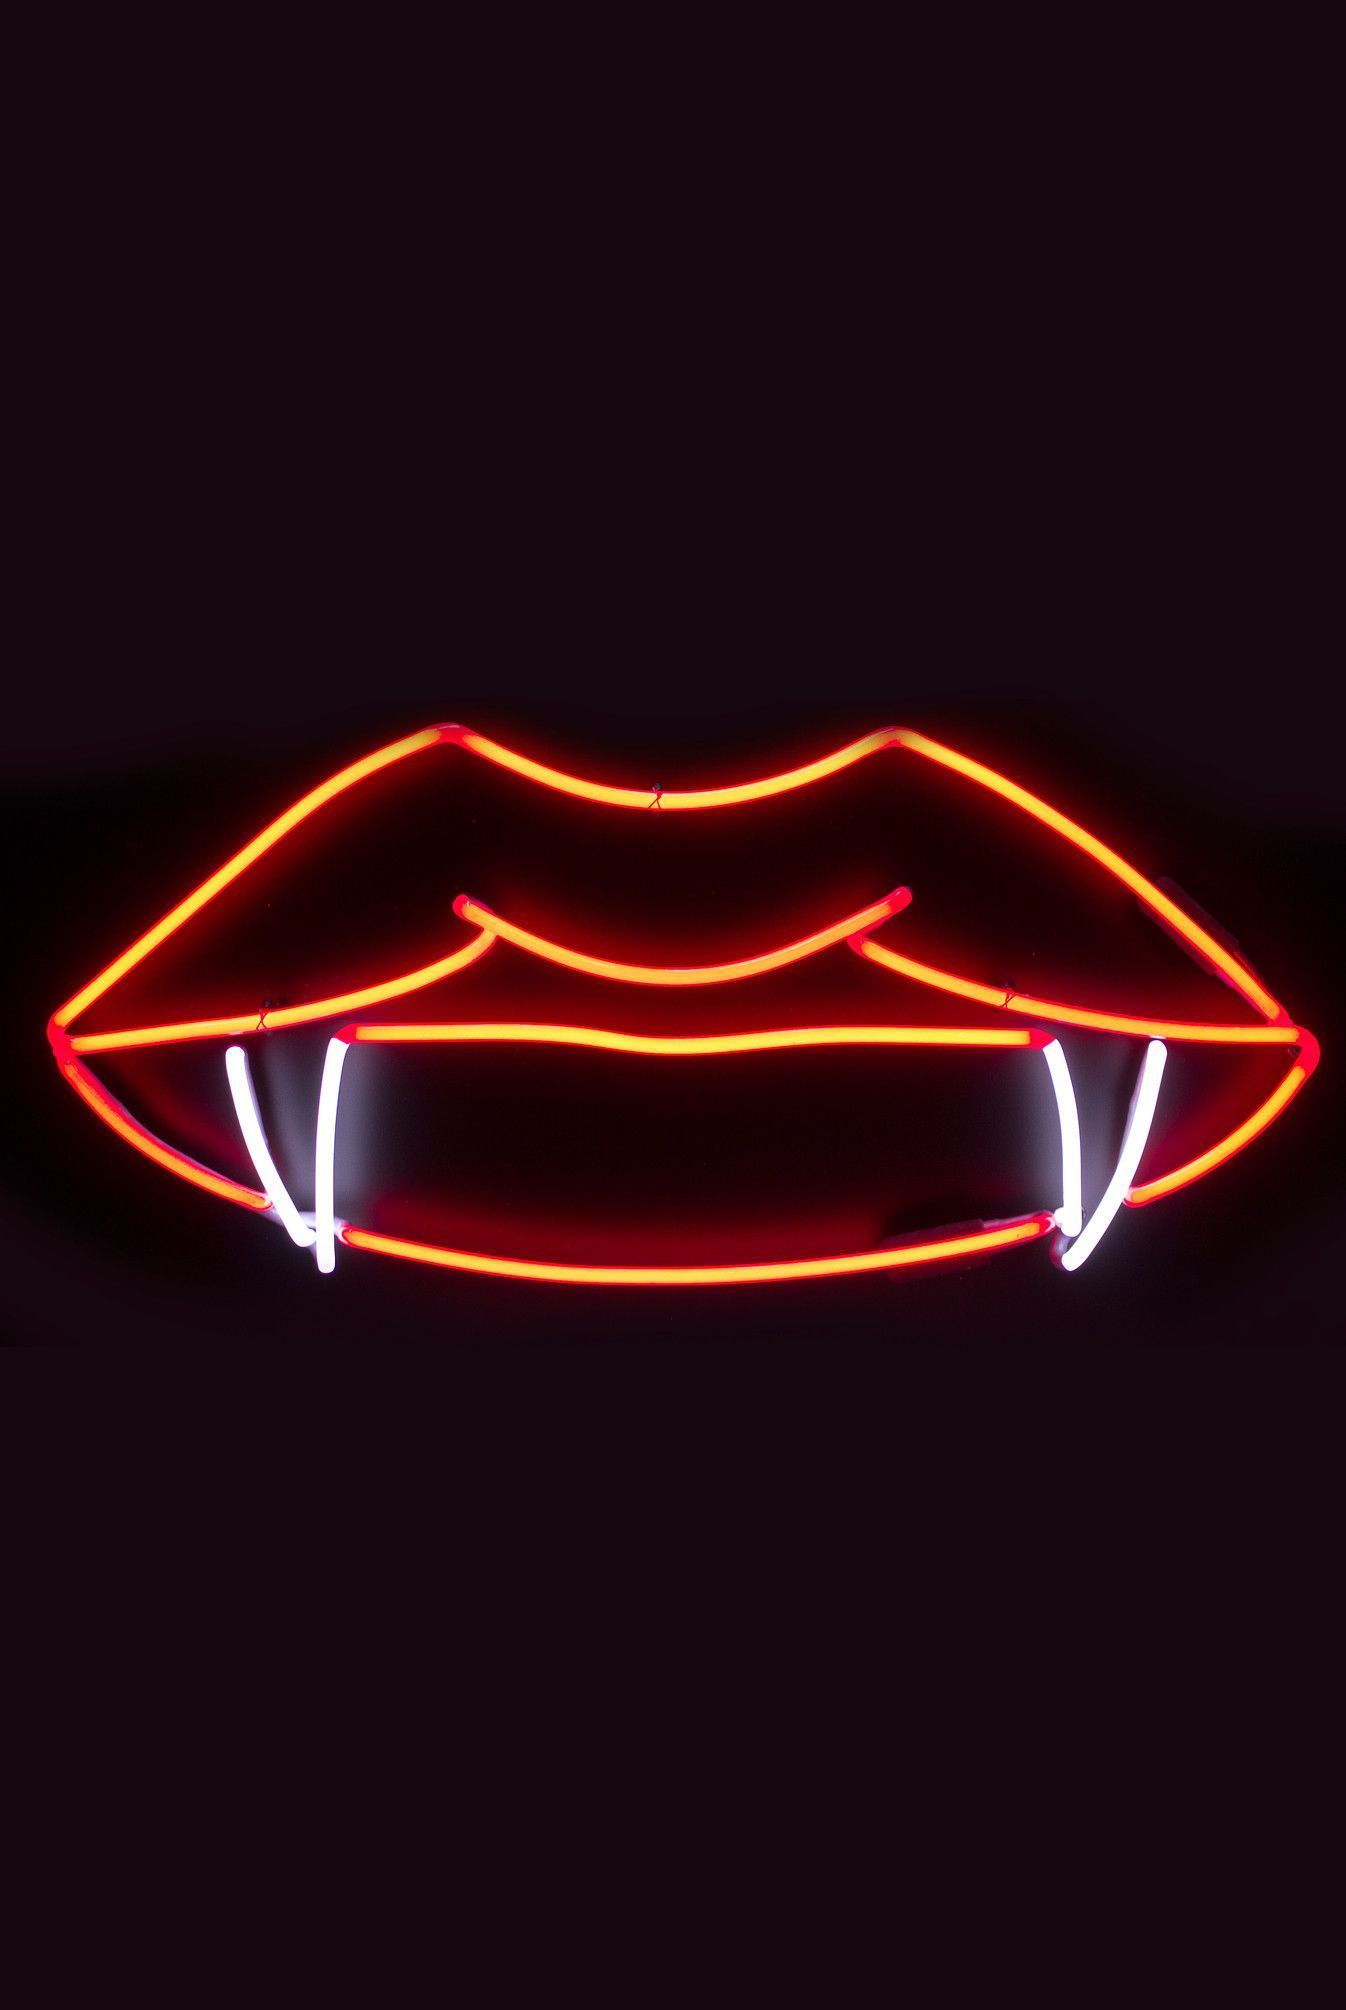 Lips and Fangs Neon Sign. Wallpaper iphone neon, Neon signs, Neon wall art